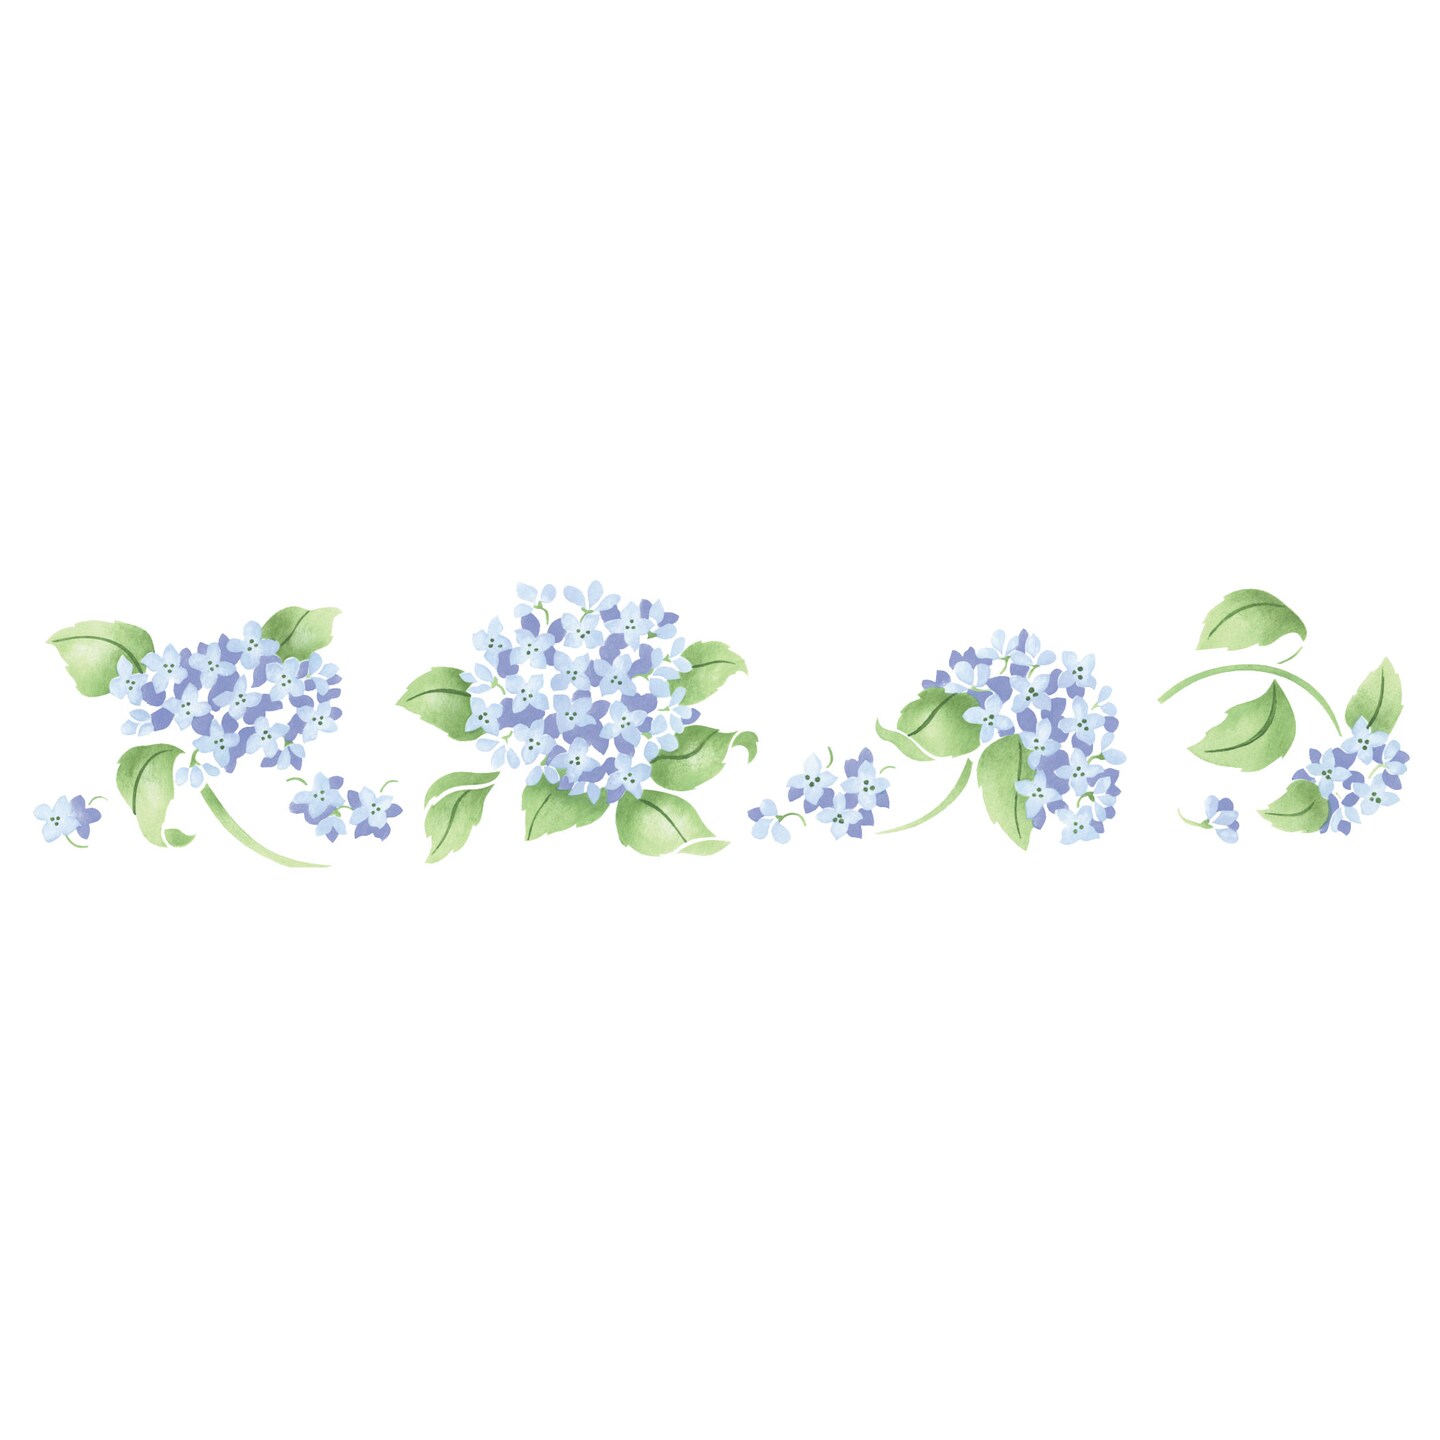 Small Hydrangea Wall Stencil Border | 2077 by Designer Stencils | Floral Stencils | Reusable Art Craft Stencils for Painting on Walls, Canvas, Wood | Reusable Plastic Paint Stencil for Home Makeover | Easy to Use &#x26; Clean Art Stencil